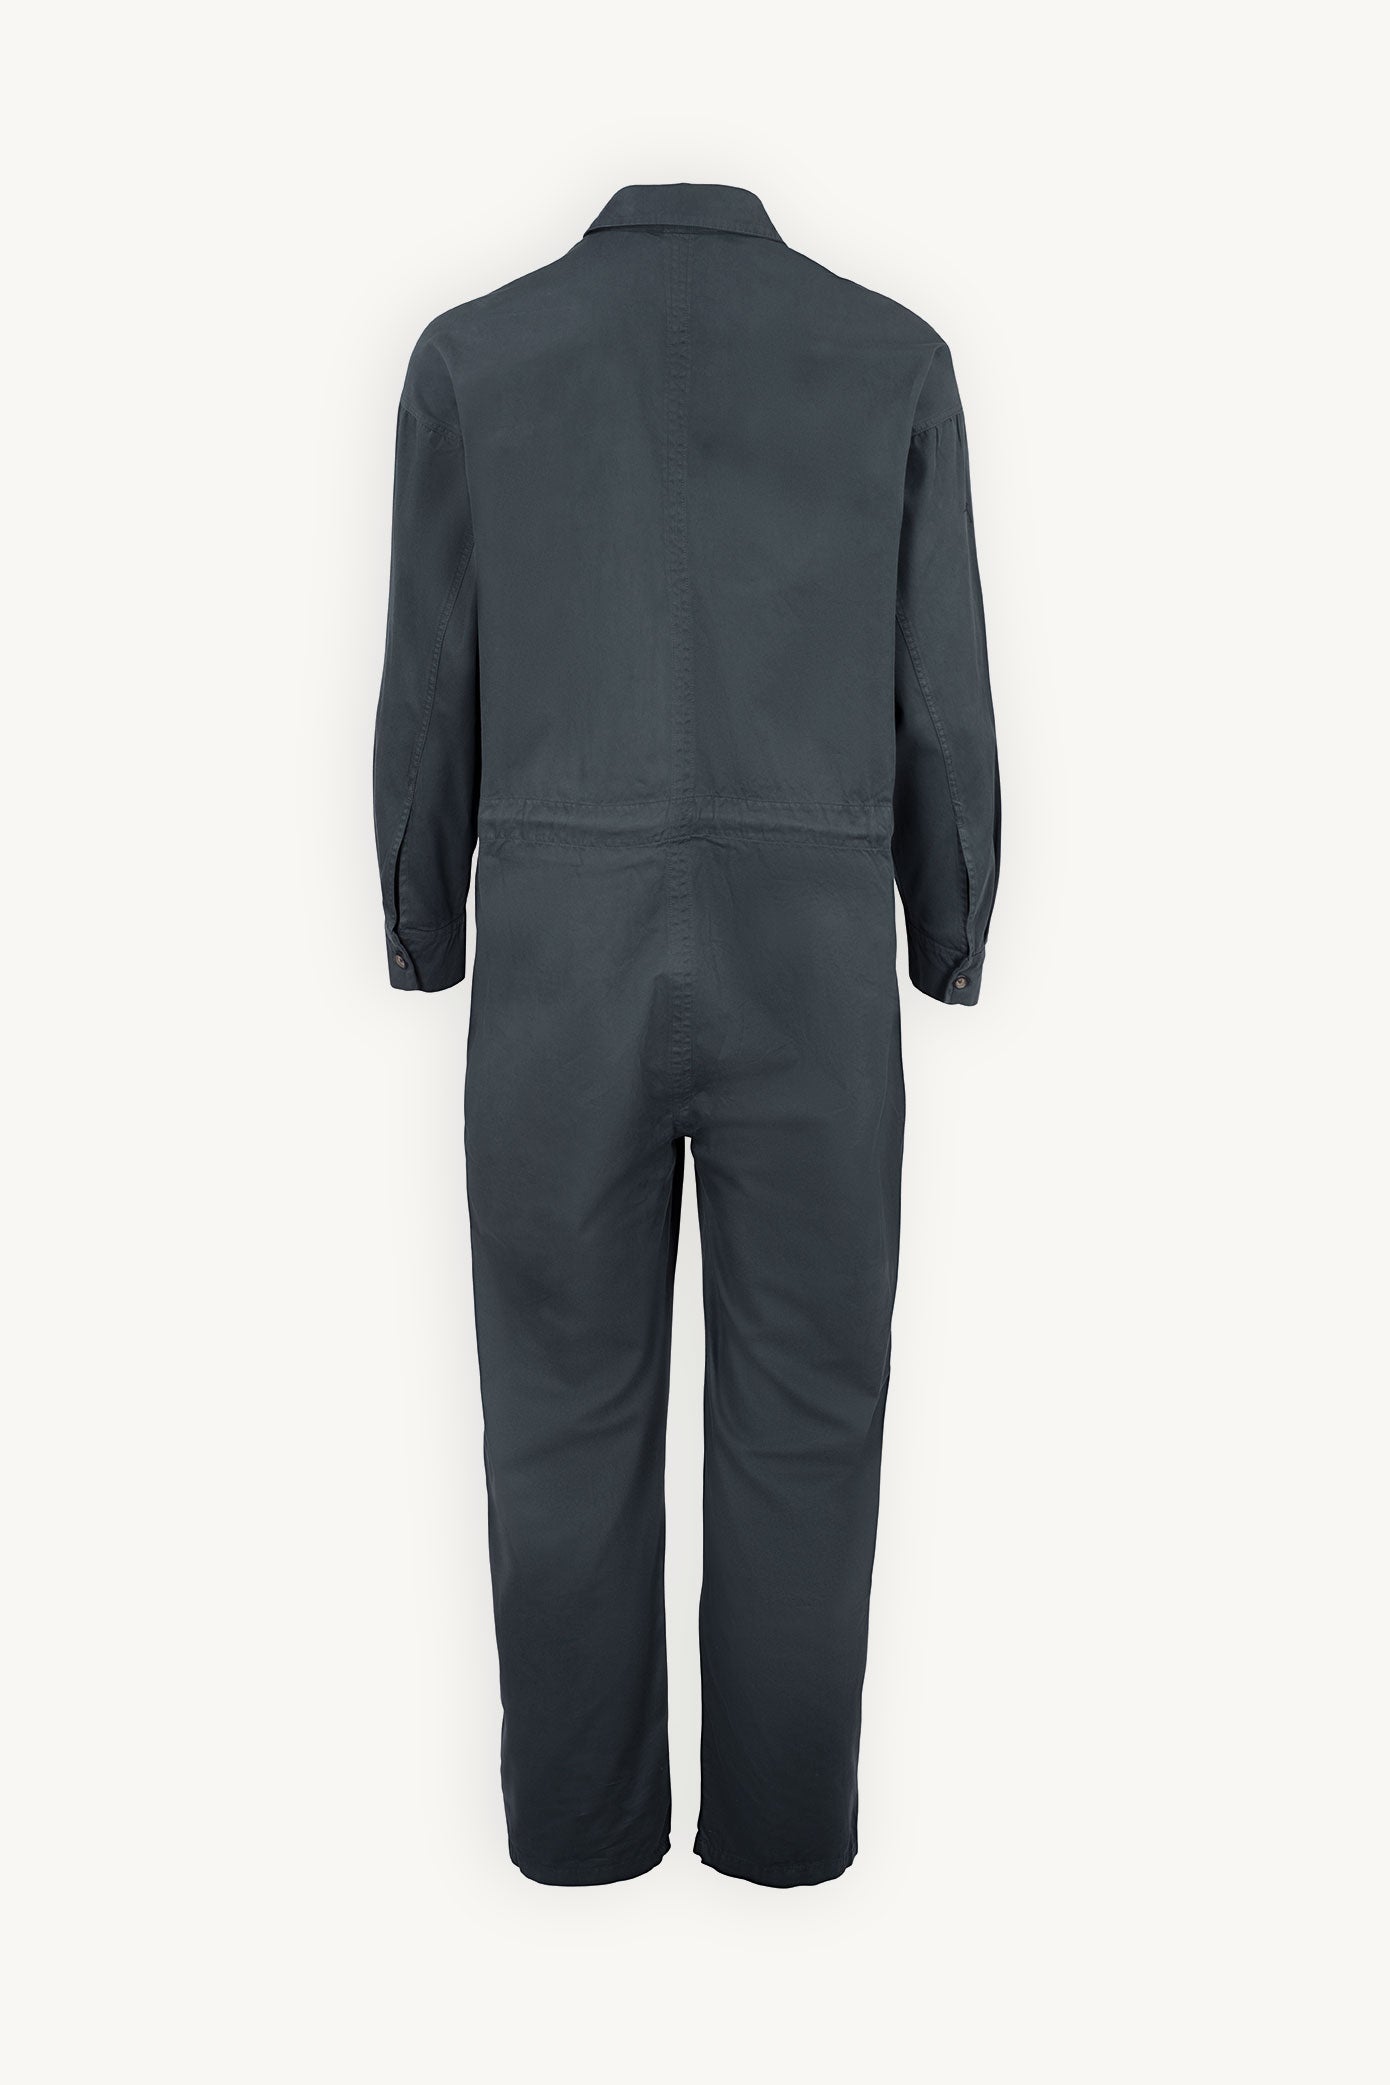 One Overall Grey Jumpsuit with Pockets